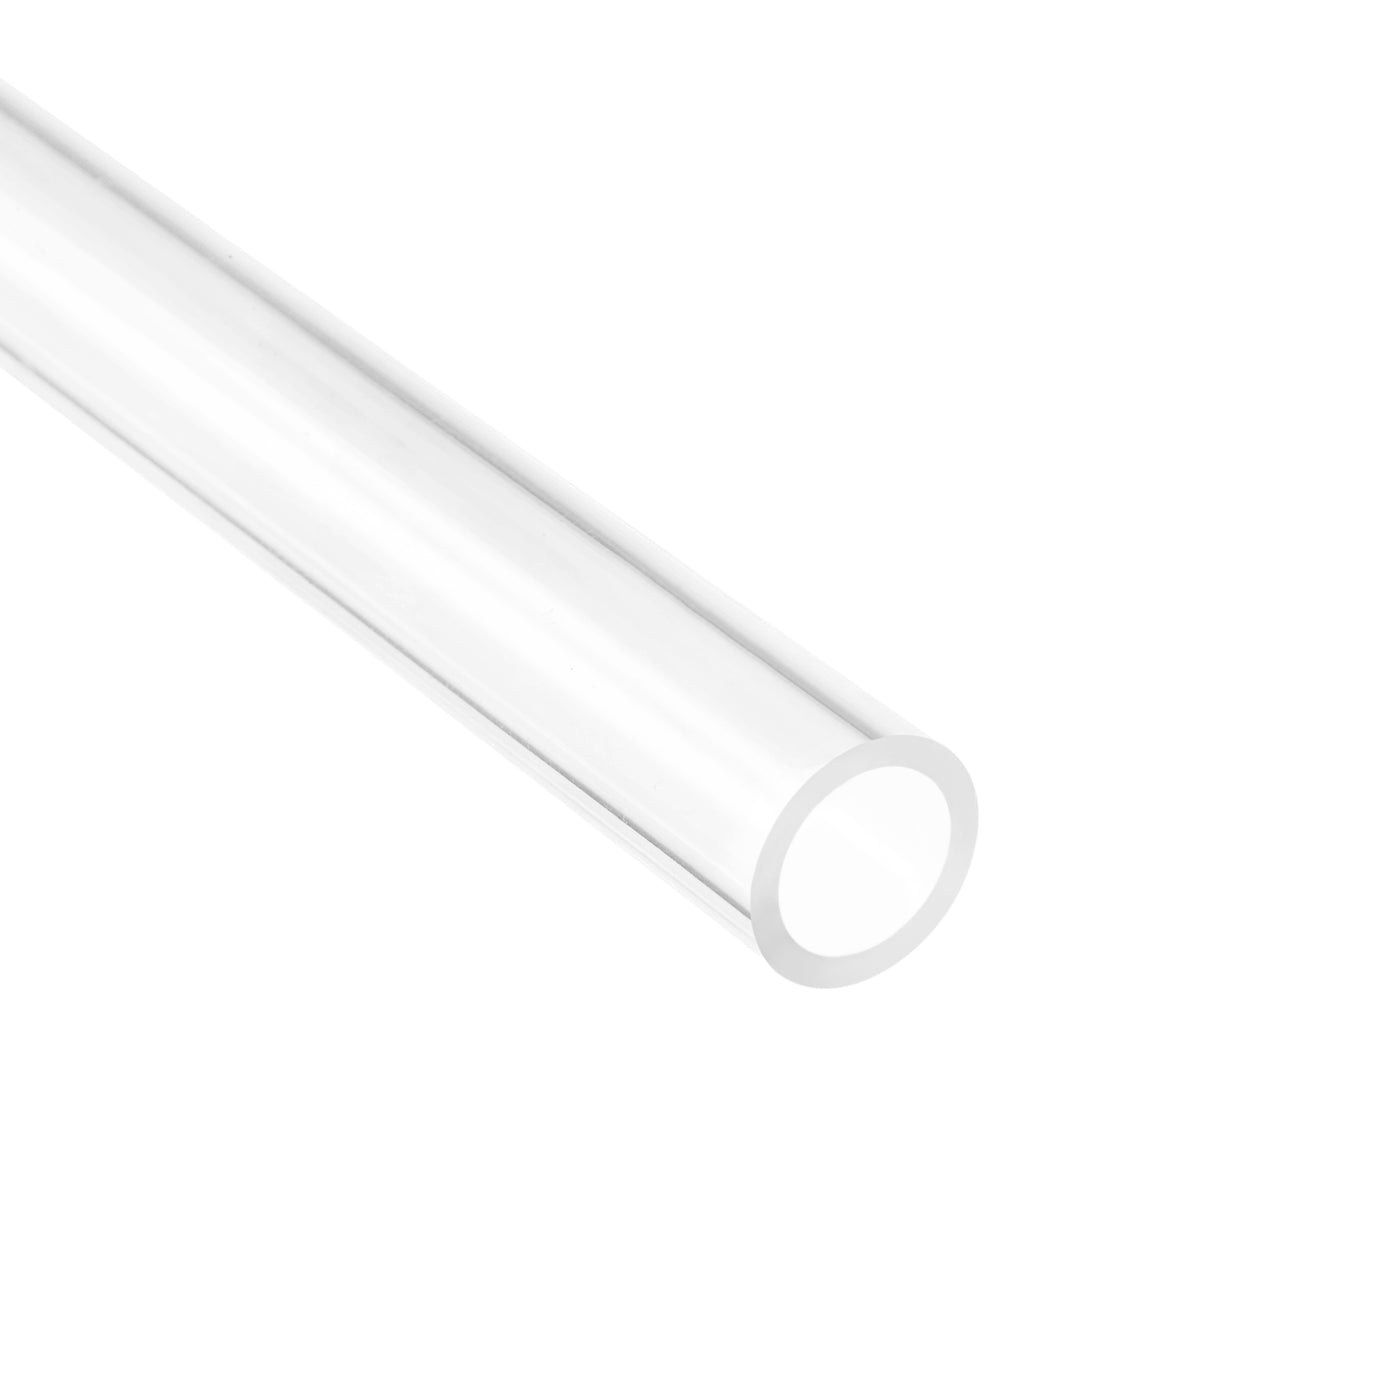 uxcell Uxcell 2pcs Clear Rigid Acrylic Pipe 10mm ID x 14mm OD x 0.5m, 1.8mm Wall Round Tube